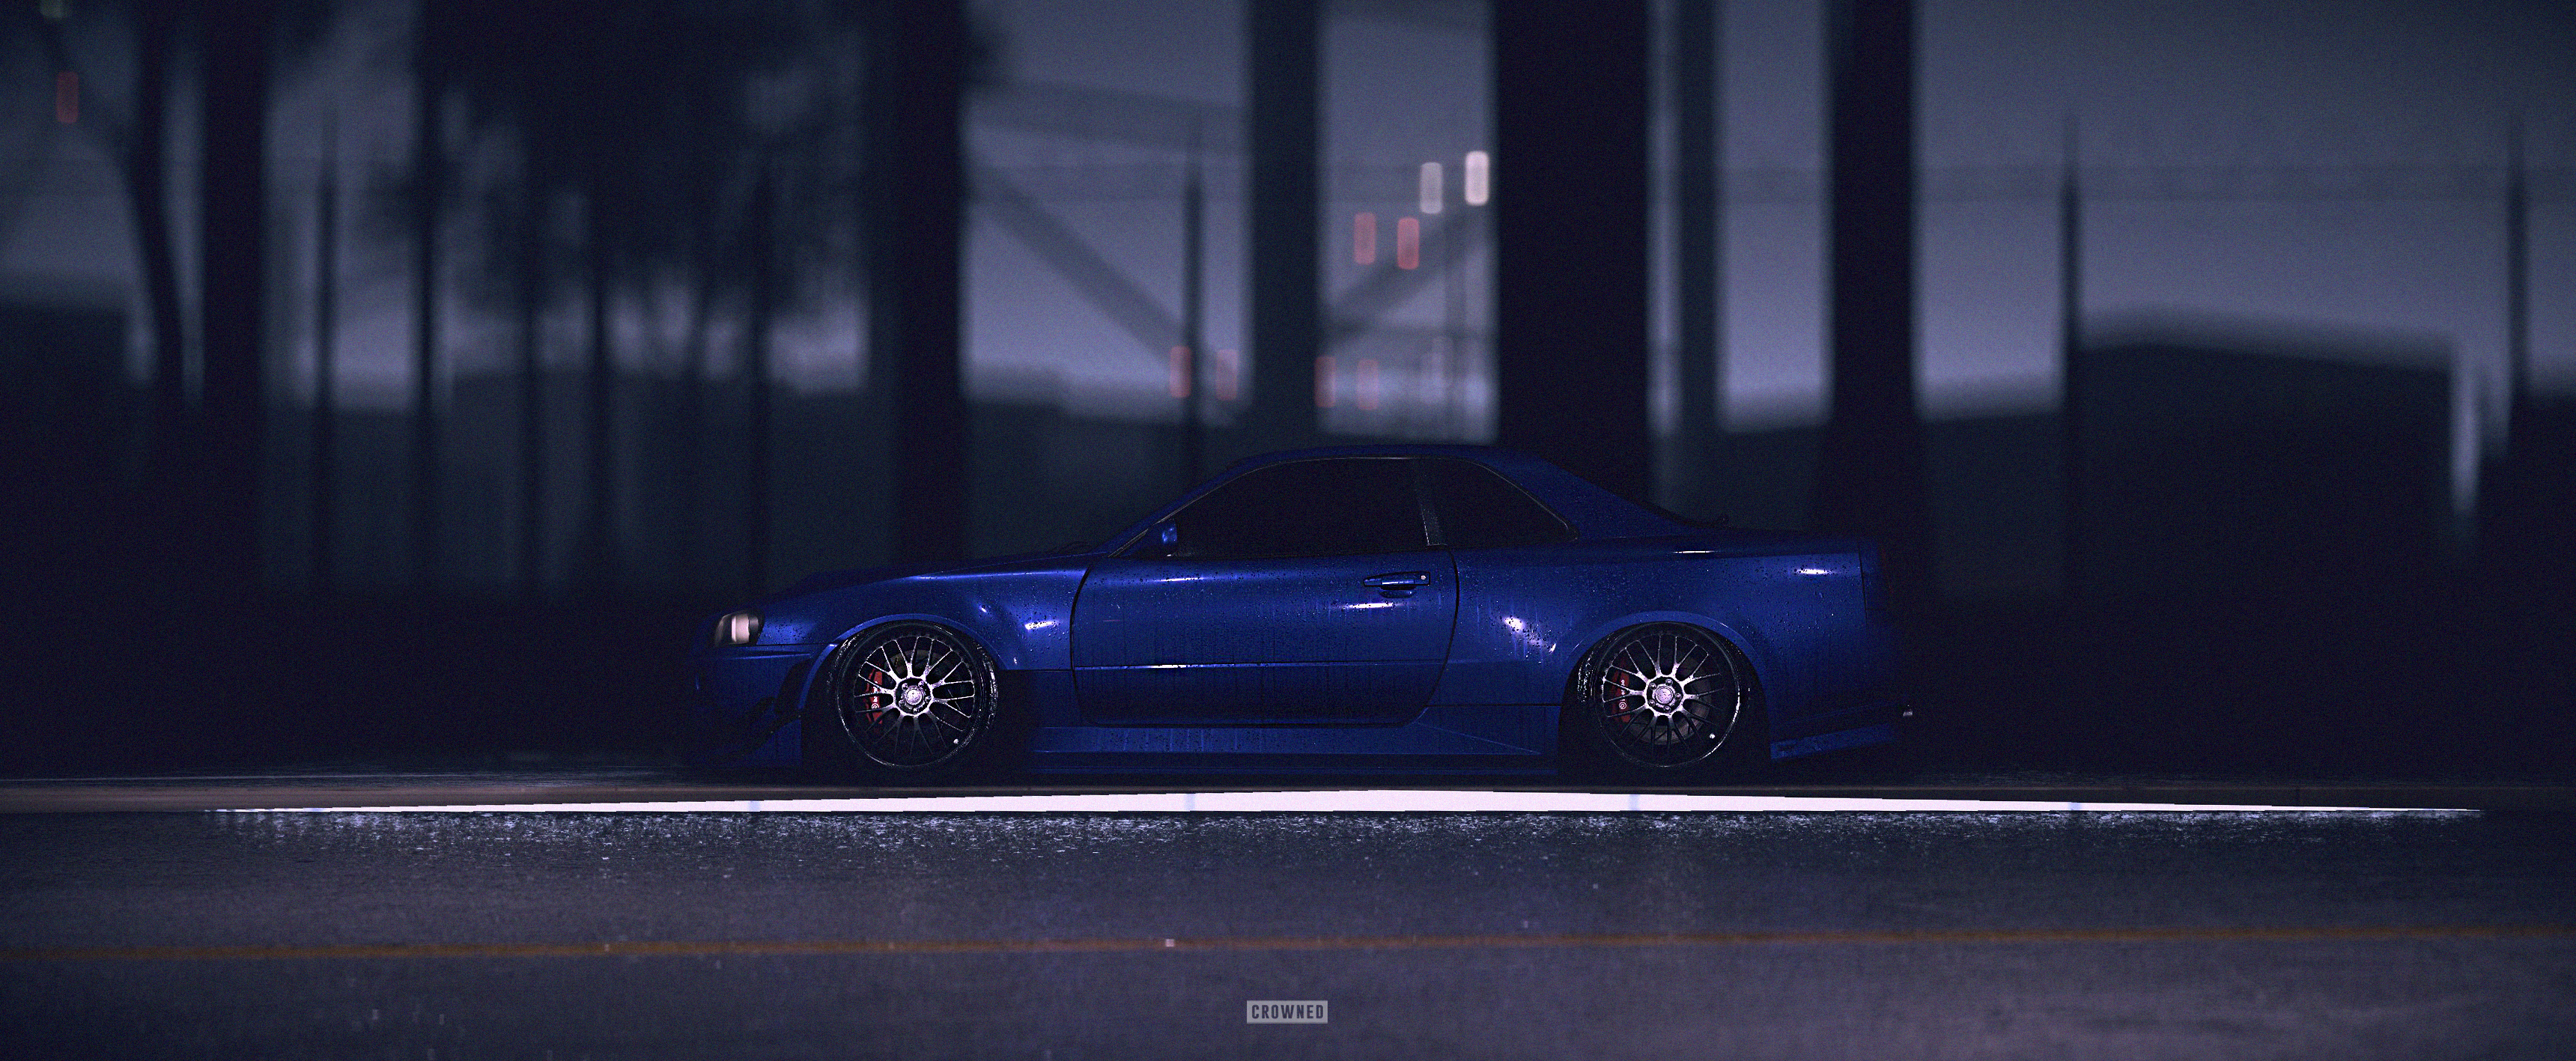 General 3440x1417 CROWNED Need for Speed Nissan Skyline R34 Nissan Skyline Nissan car